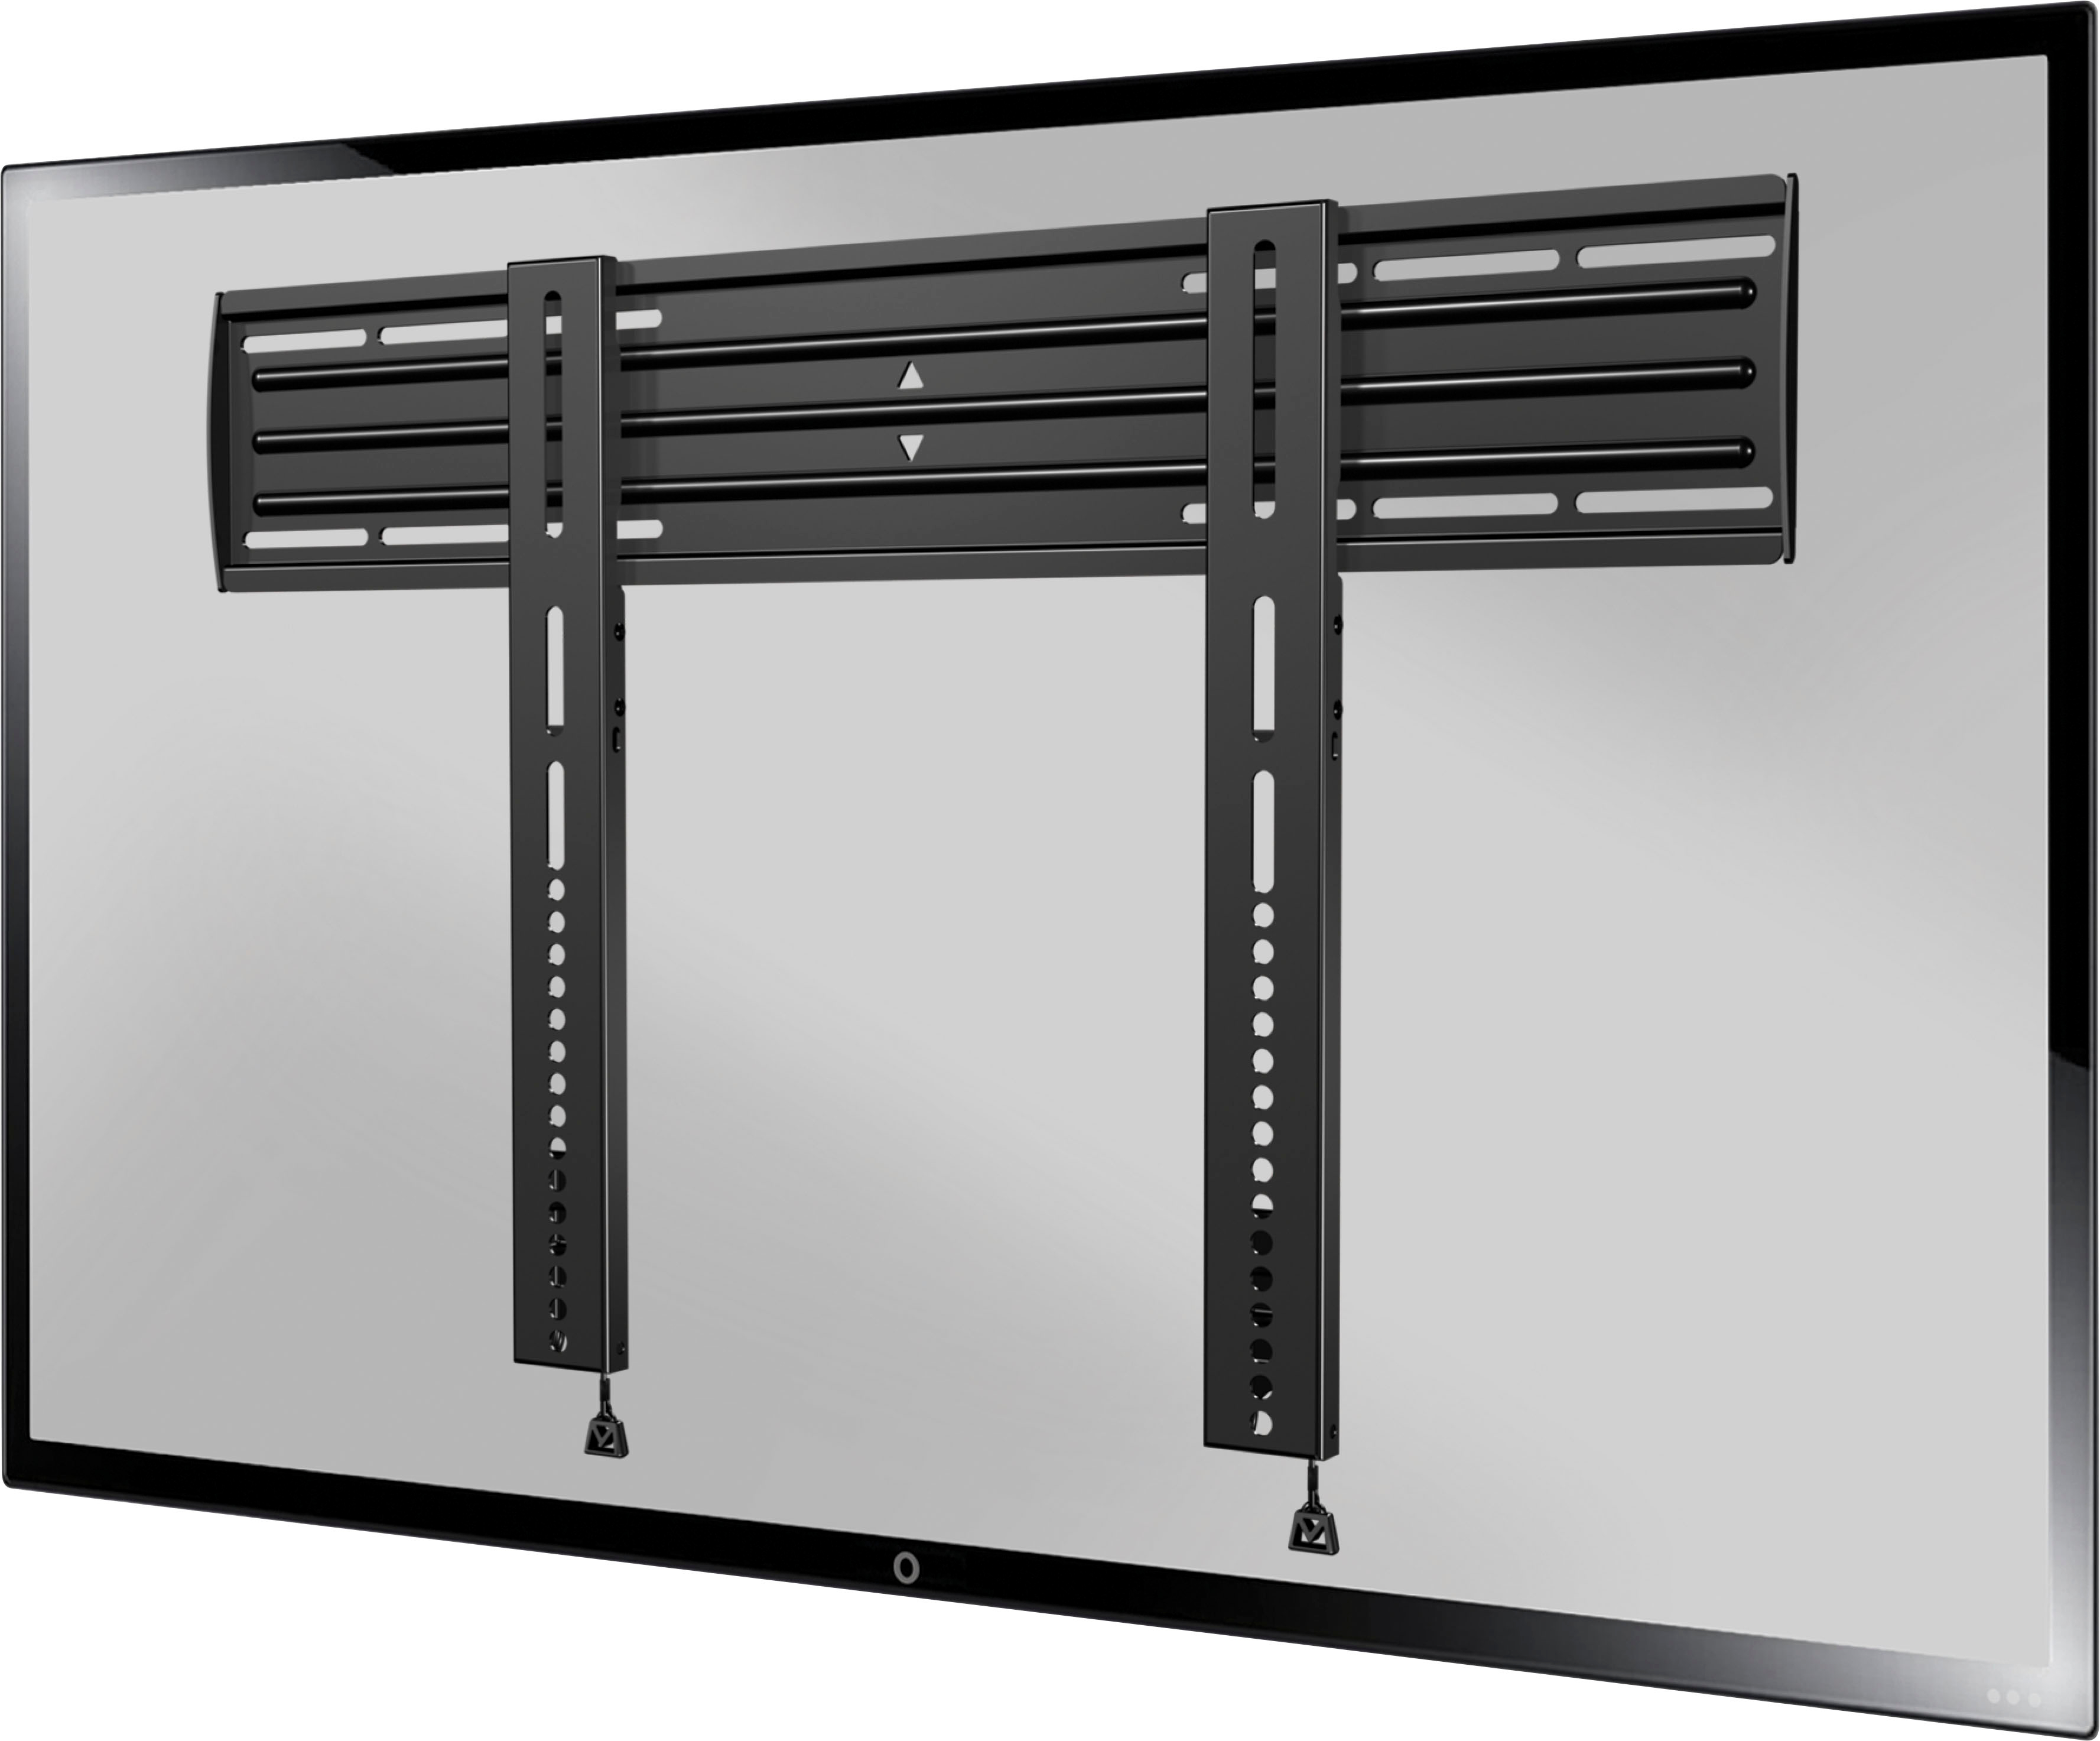 SANUS Elite - Super Slim Fixed-Position TV Wall Mount for Most TVs 32"-80" up to 150lbs - Easy Cable Access - Lateral Shift - Black